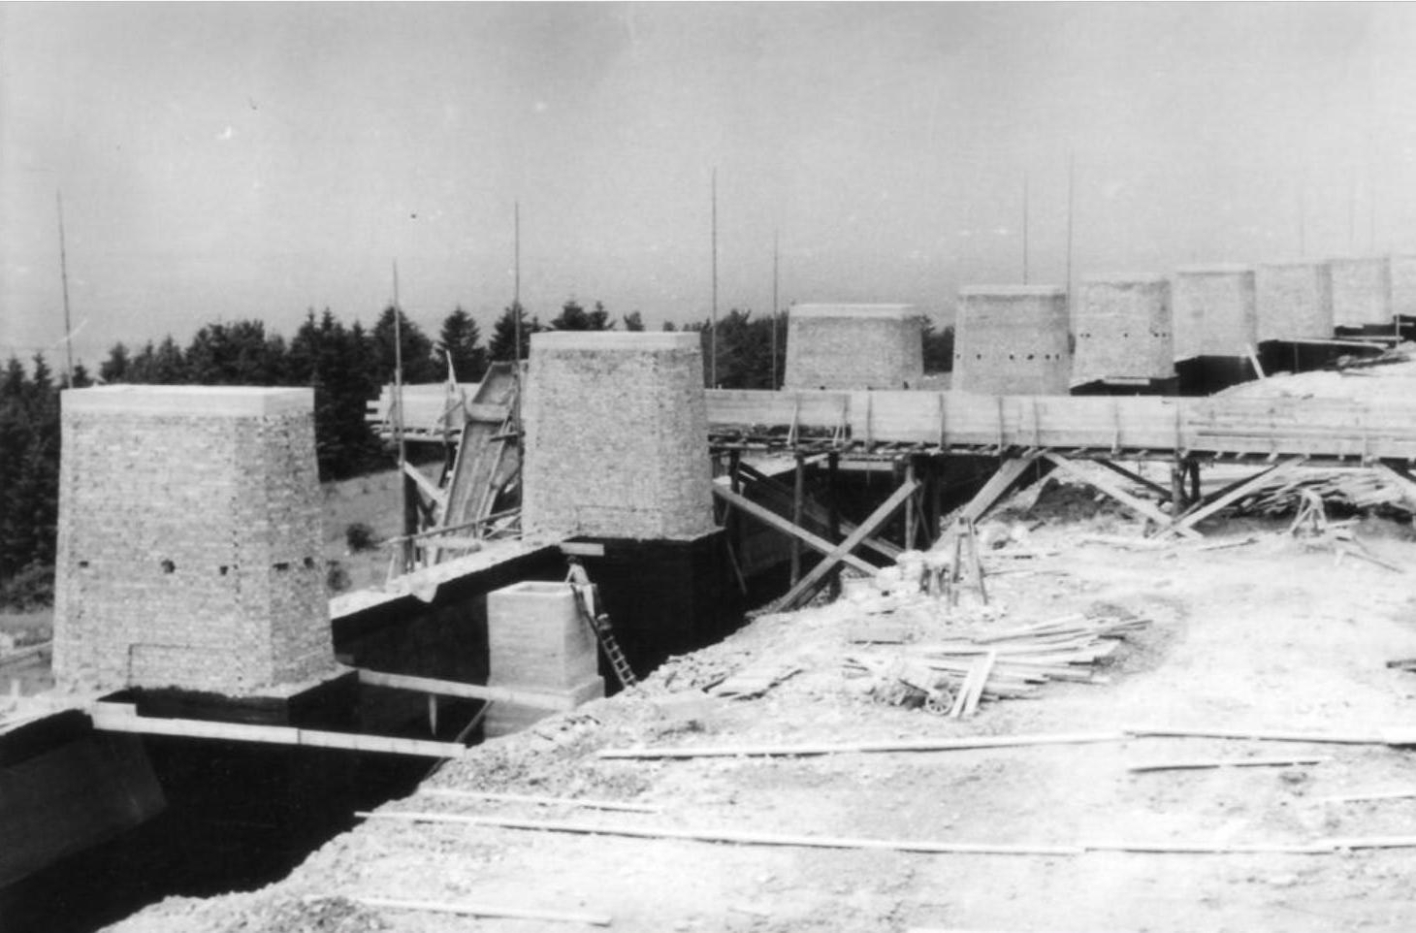 Bricked-on pedestals for the fire bowls on the Street of Nations during construction. In total, 7 pedestals are visible in the picture. The rest of the picture shows building material and wooden scaffolding.